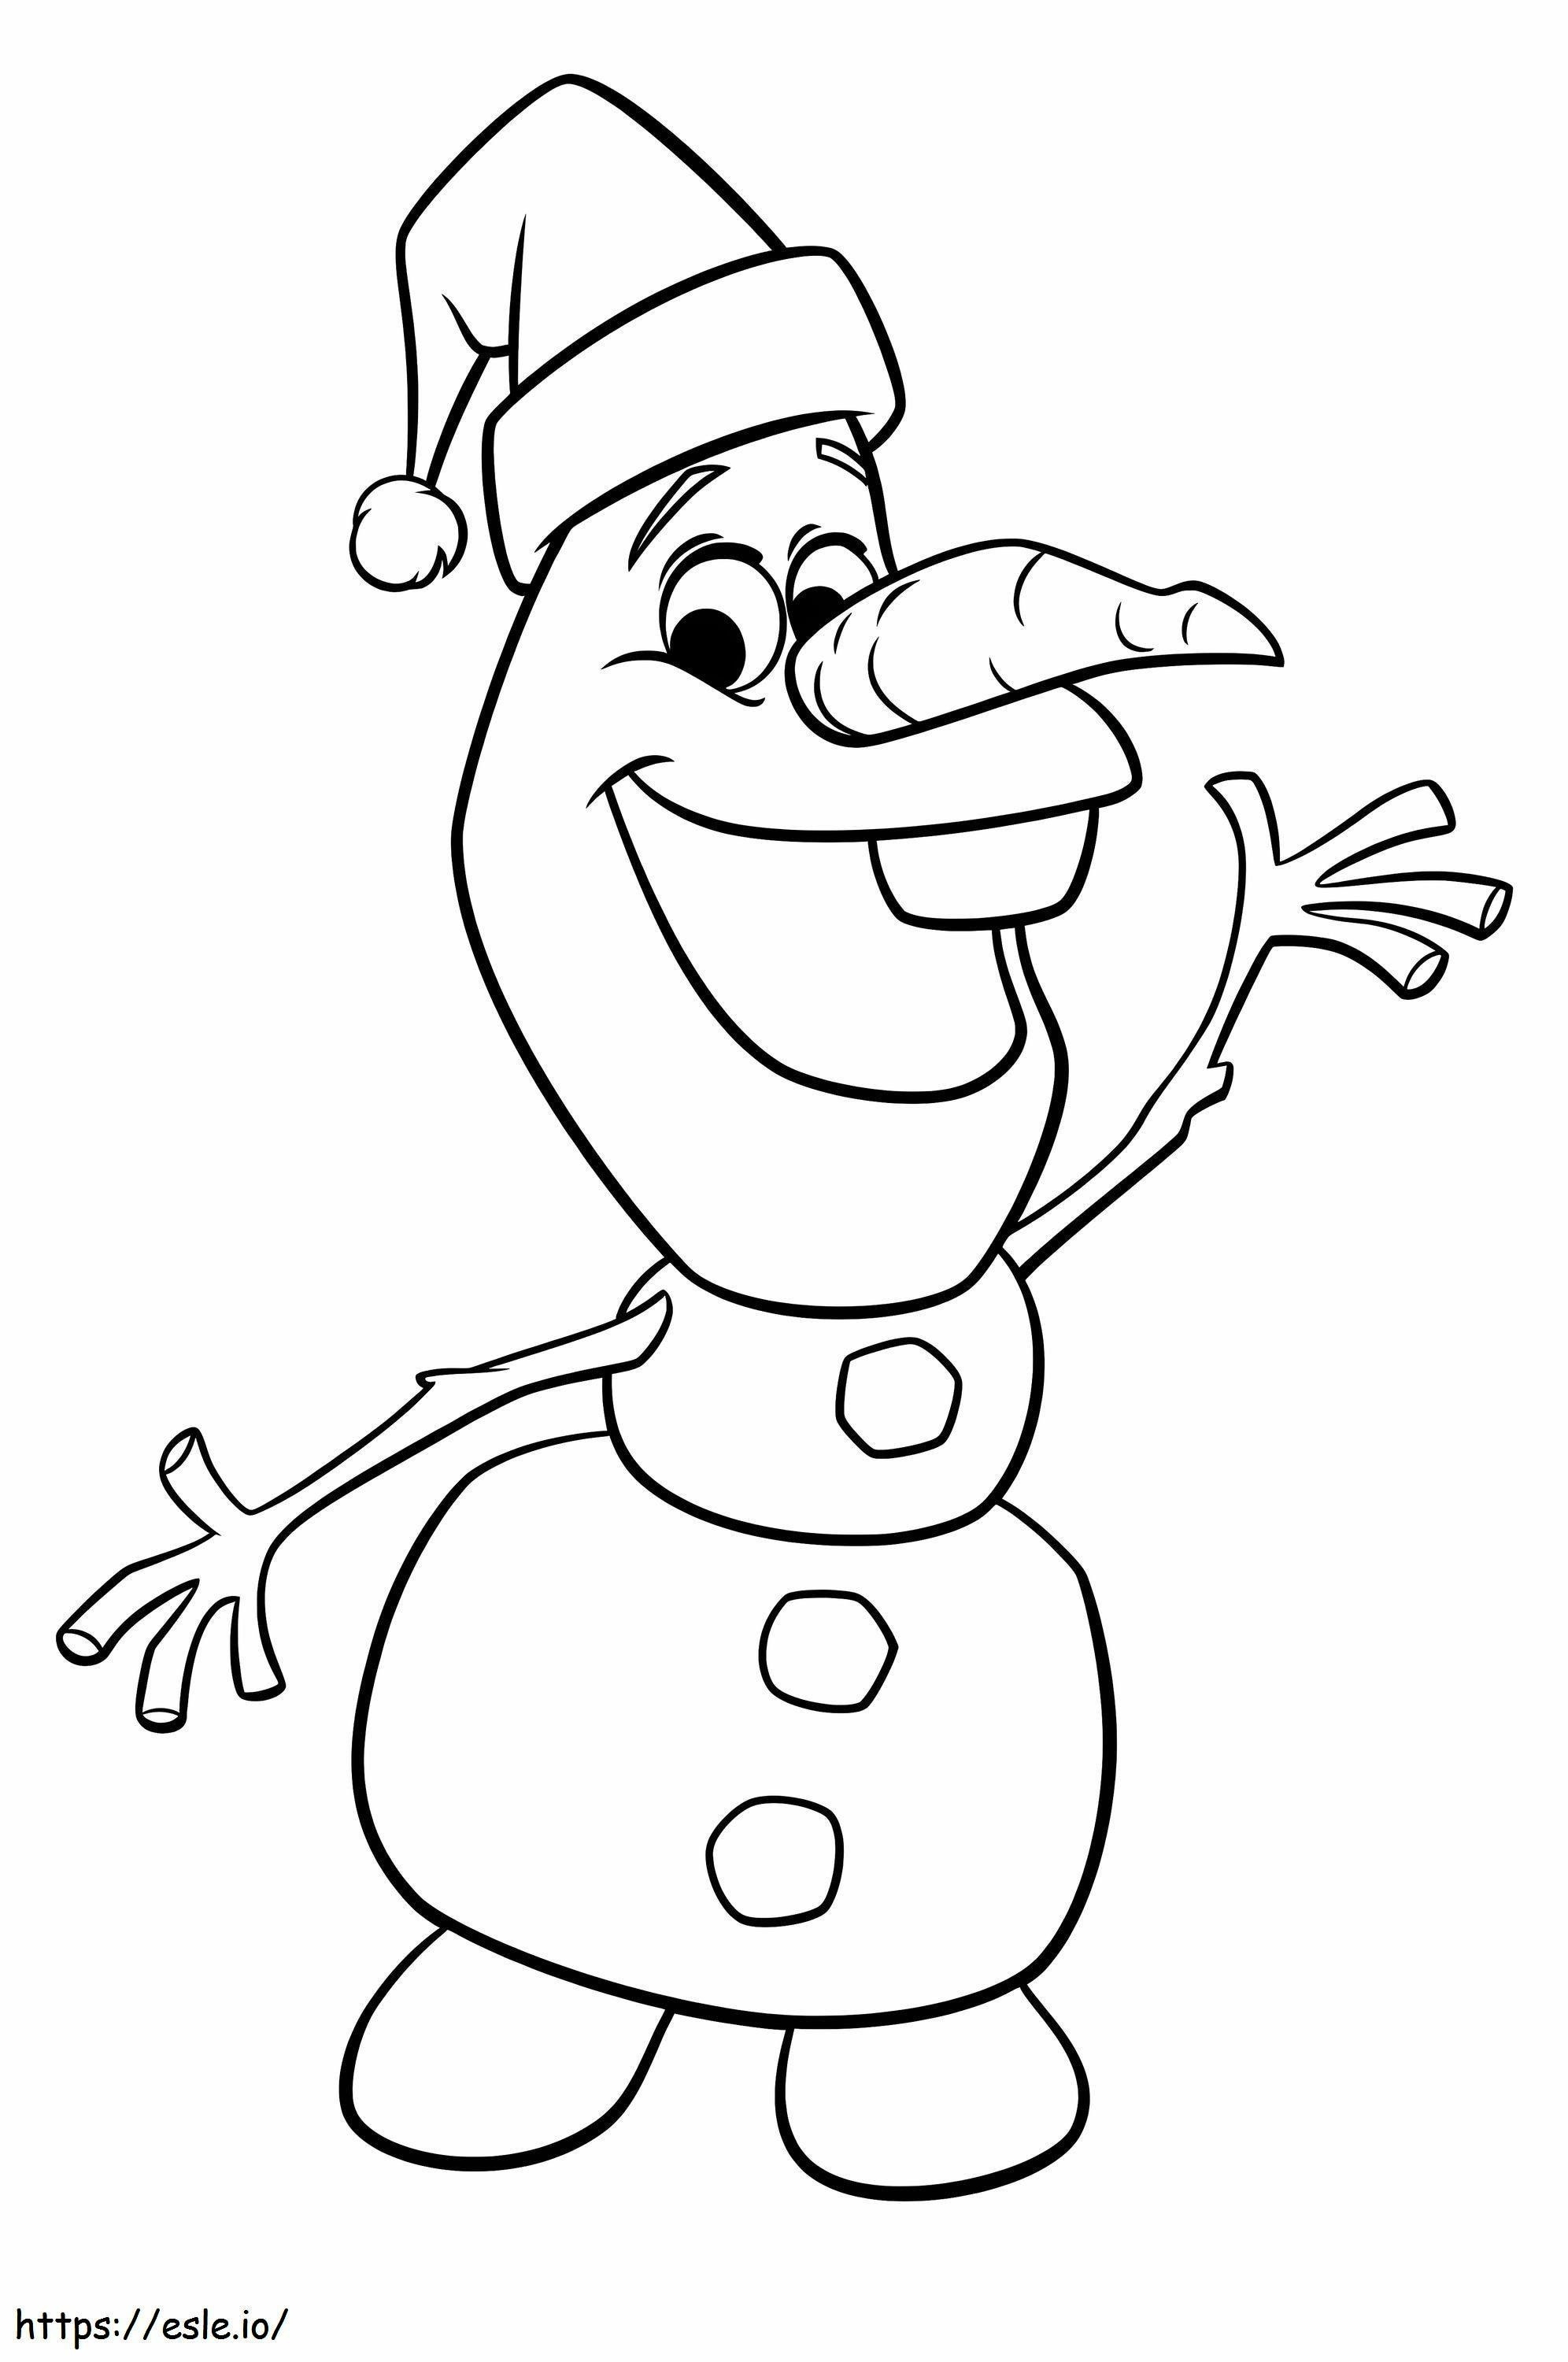 Olaf With Christmas Hat coloring page